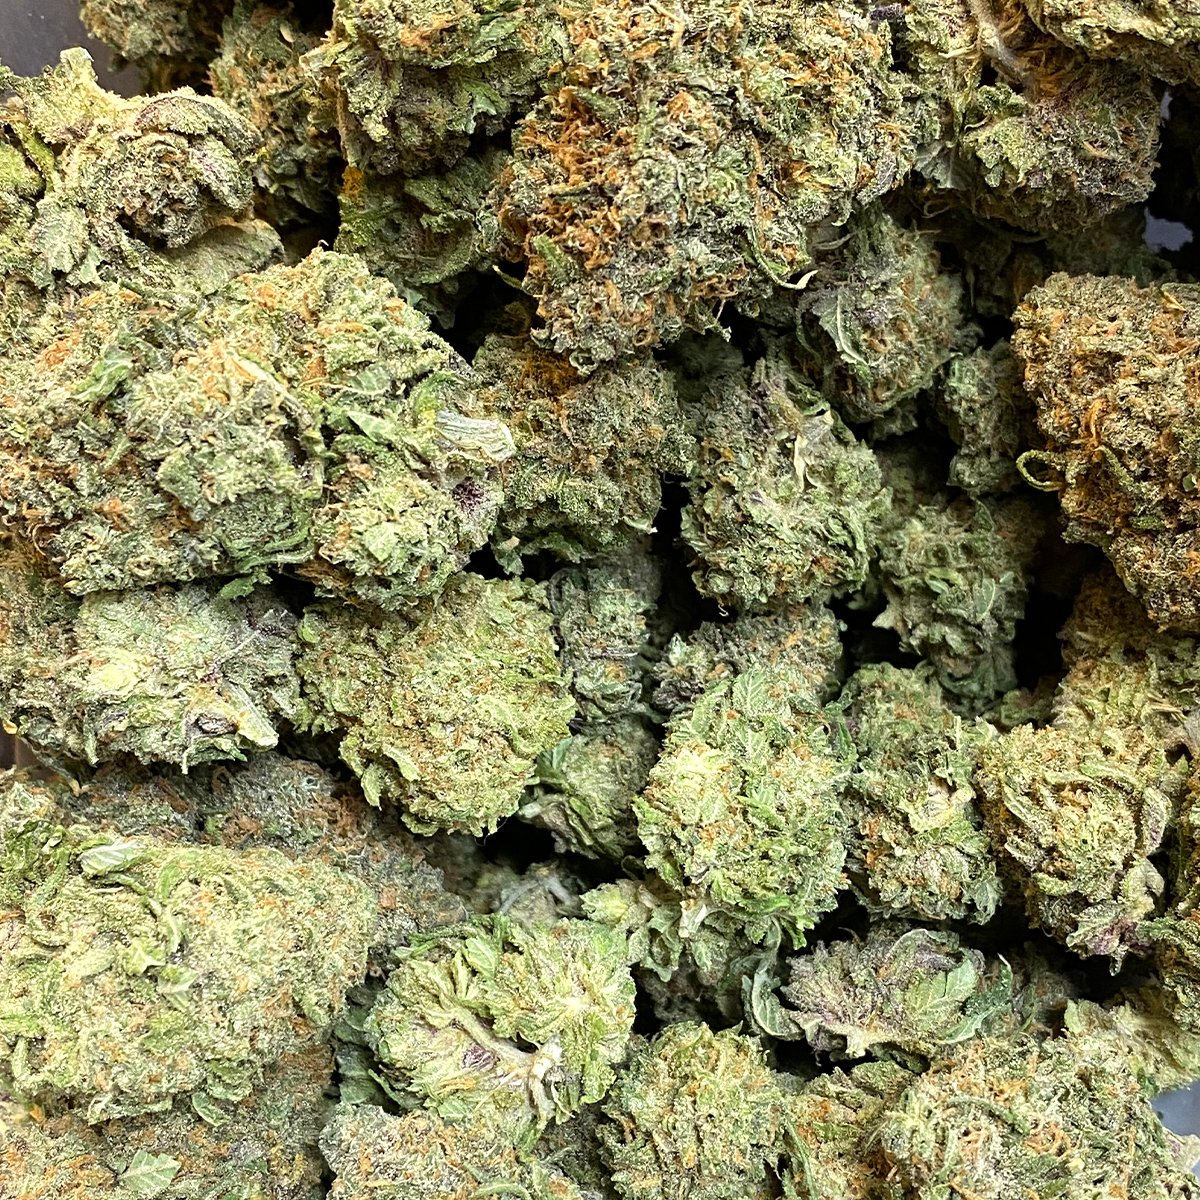 Grape Punch | Buy Weed Online| Dispensary Near Me